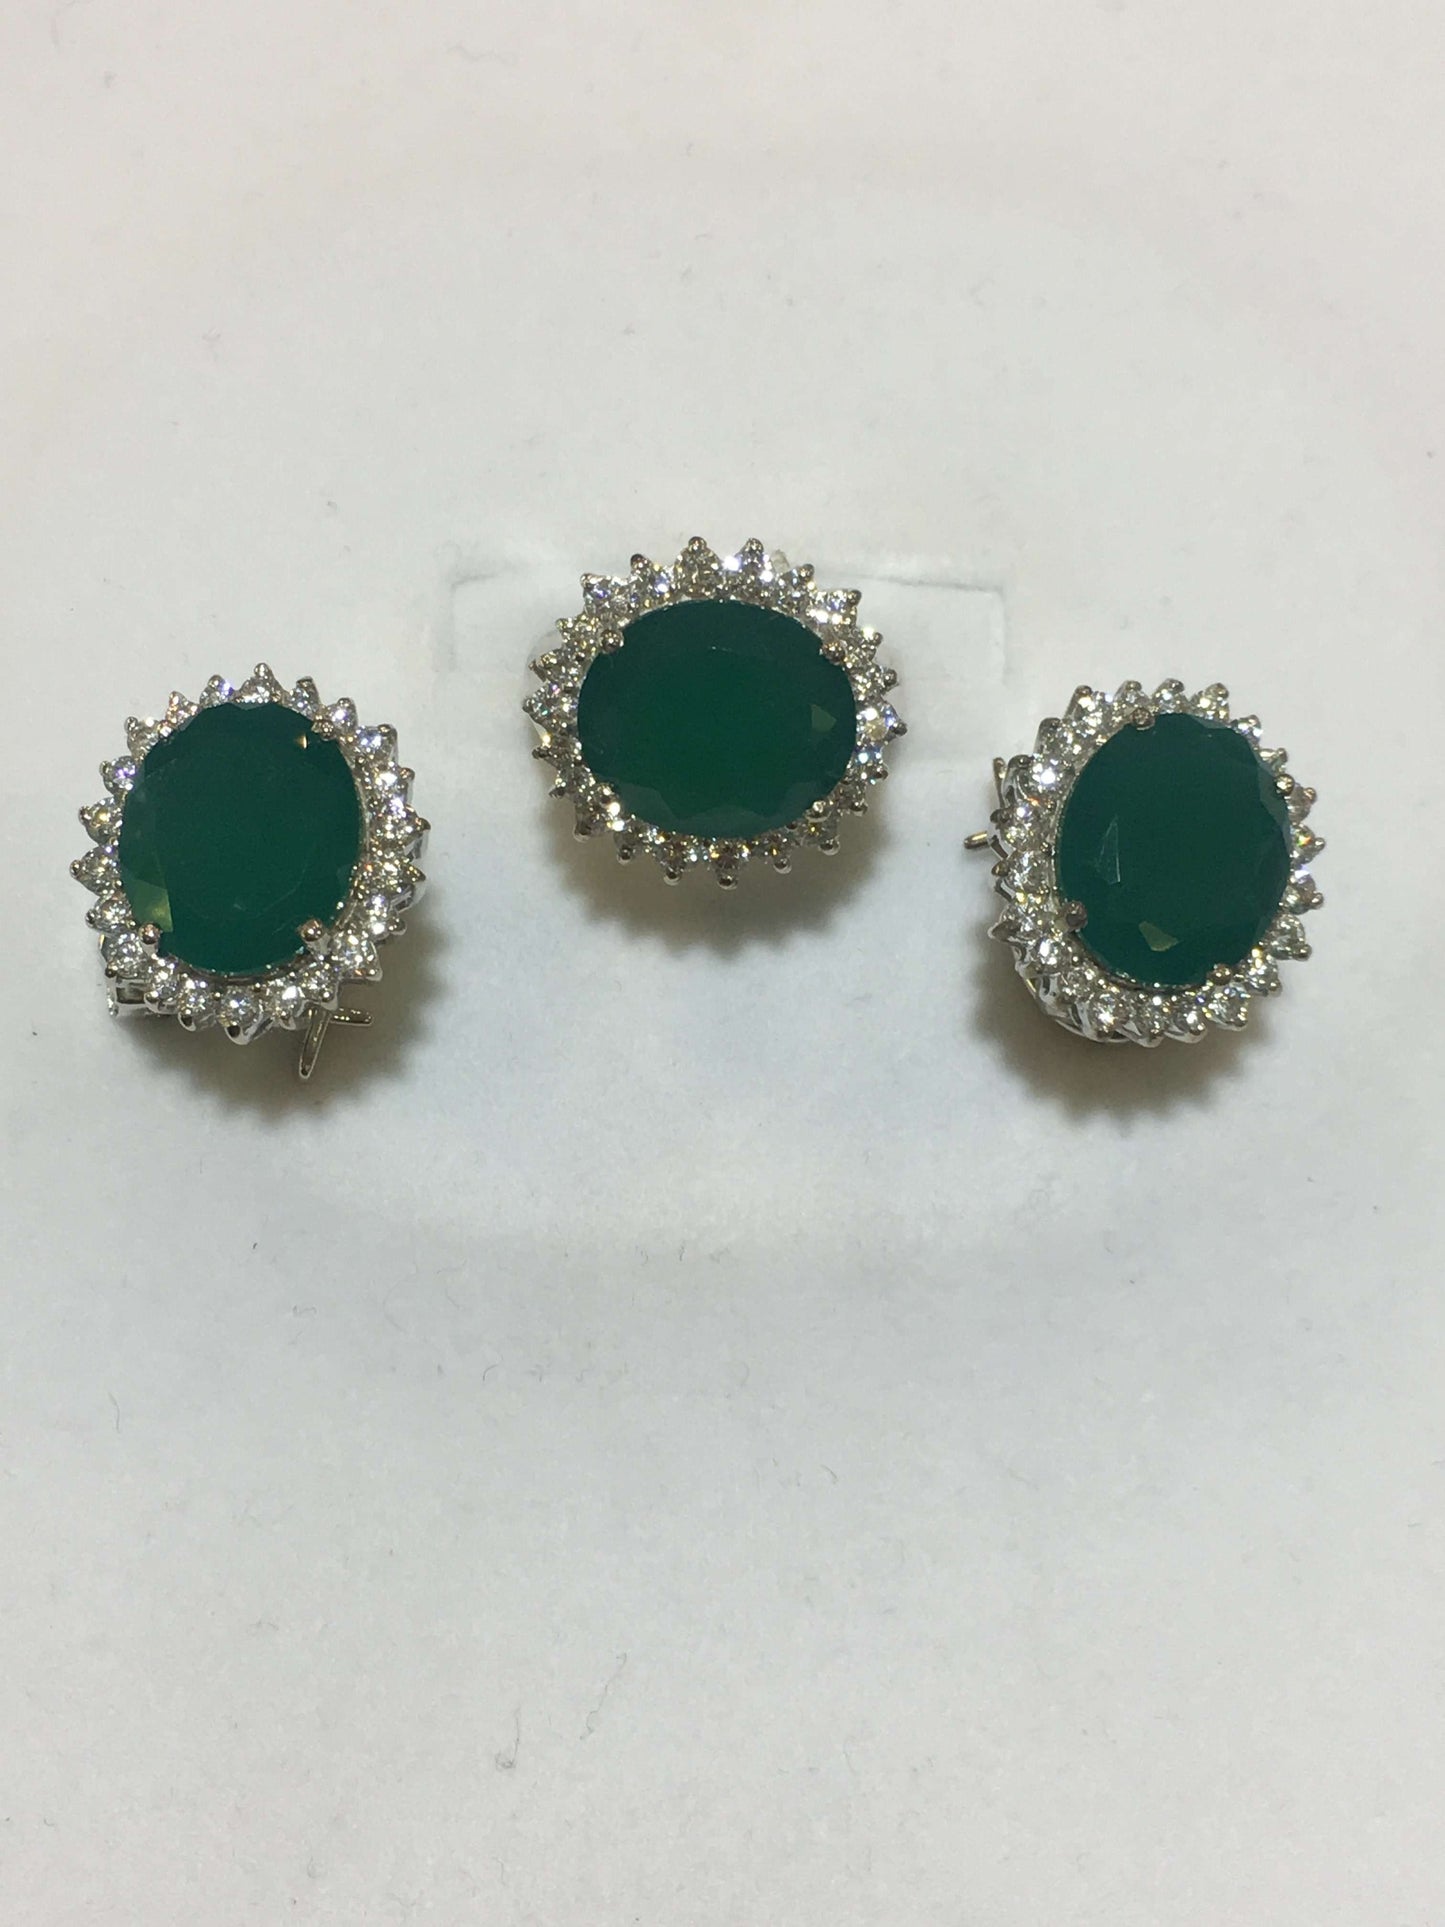 Italian Sterling Silver Earring and Ring with Emerald Stone